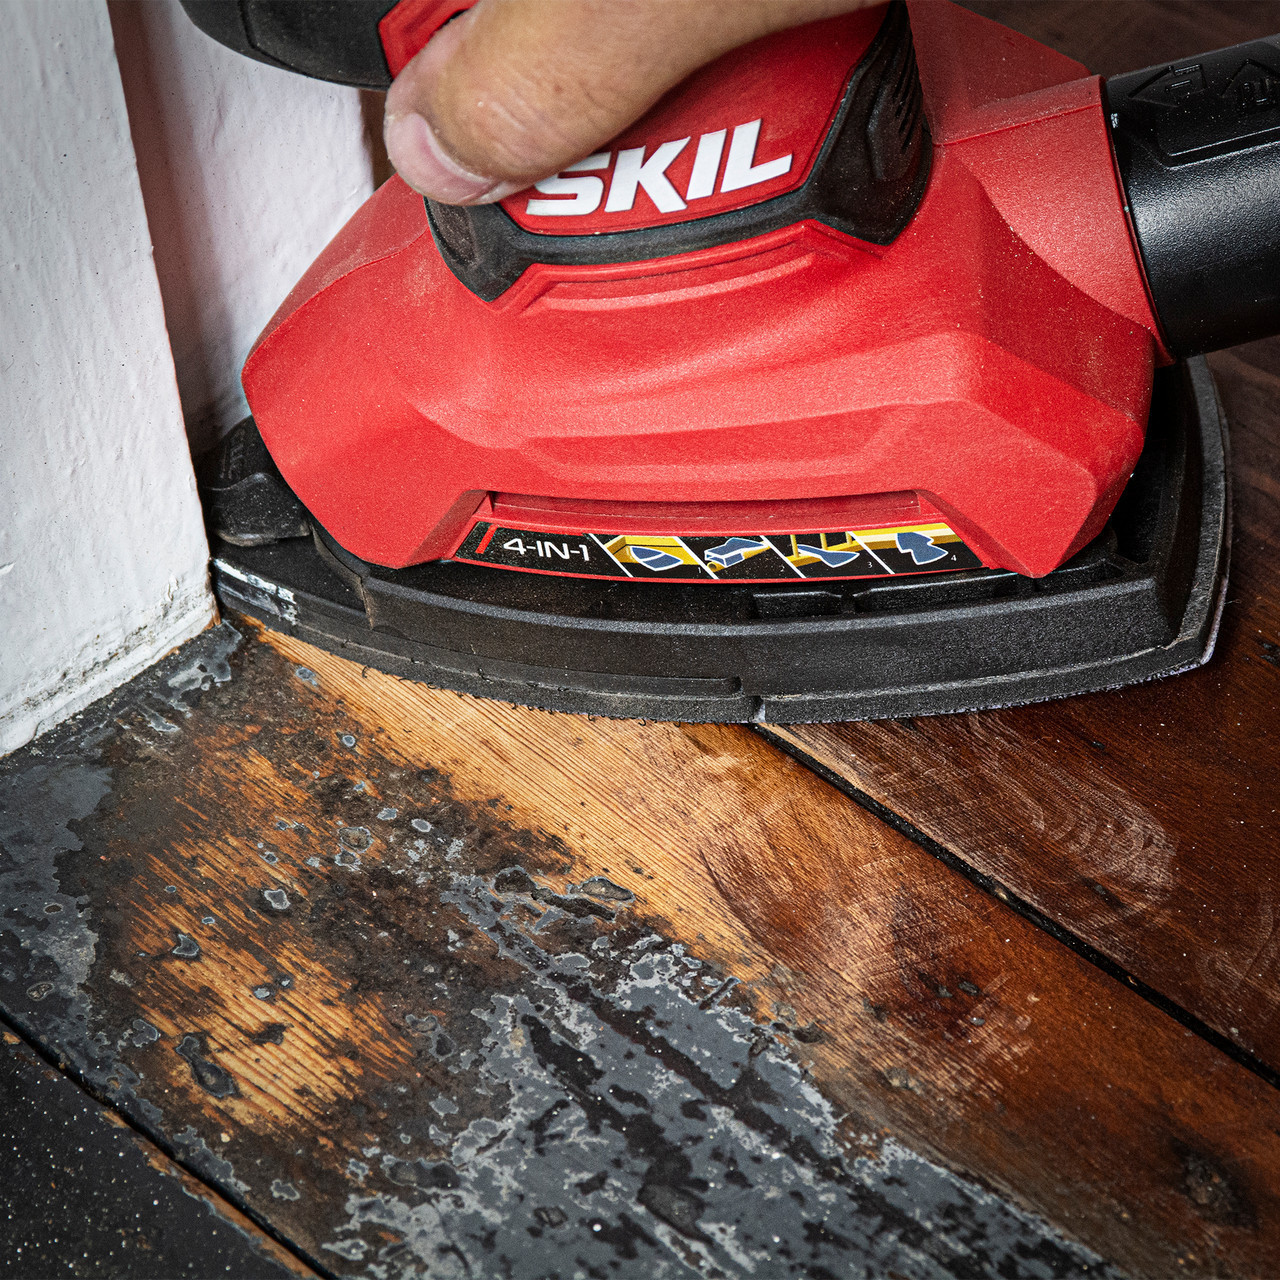 Flexible backer minimises cracking and grit loss for long lasting sanding and durability